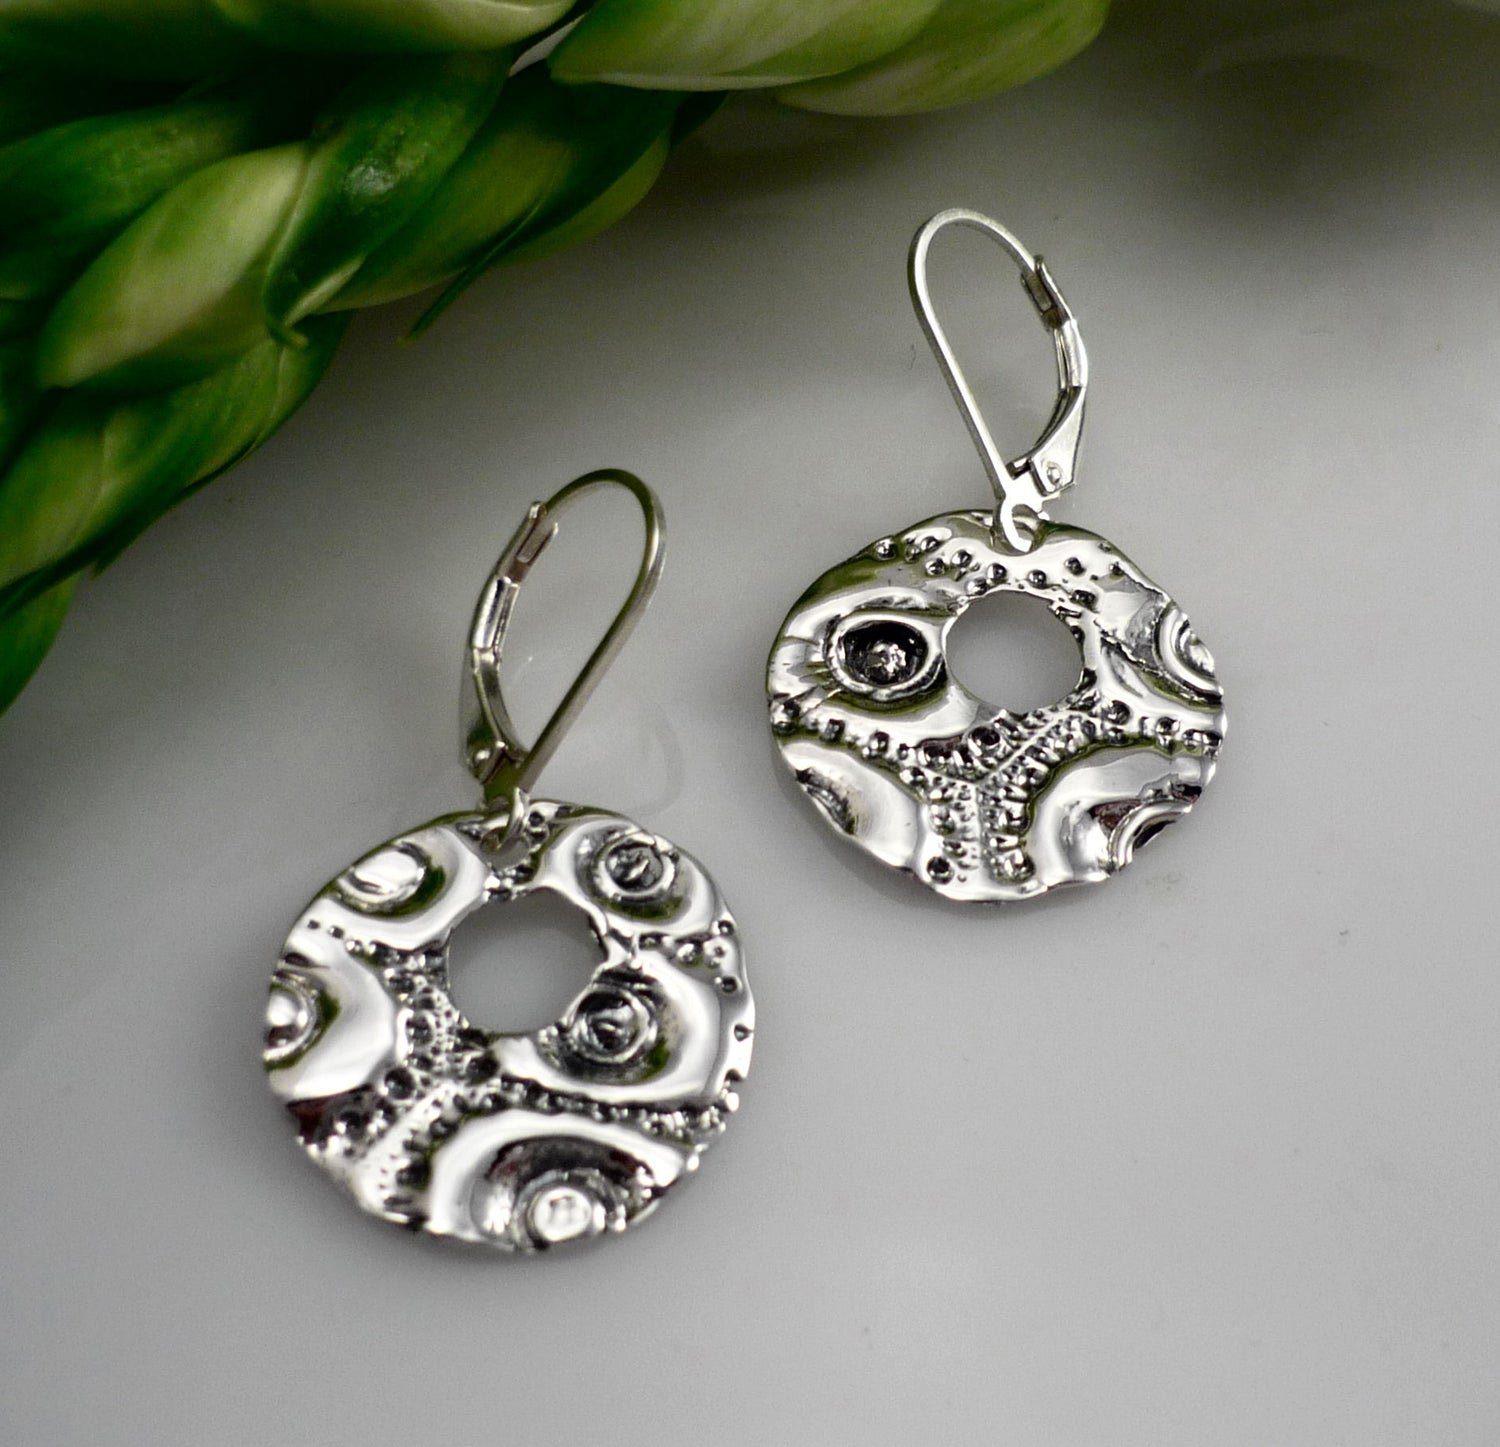 SAND DOLLARS EARRINGS, disc earrings with a hole inspired by a seashell